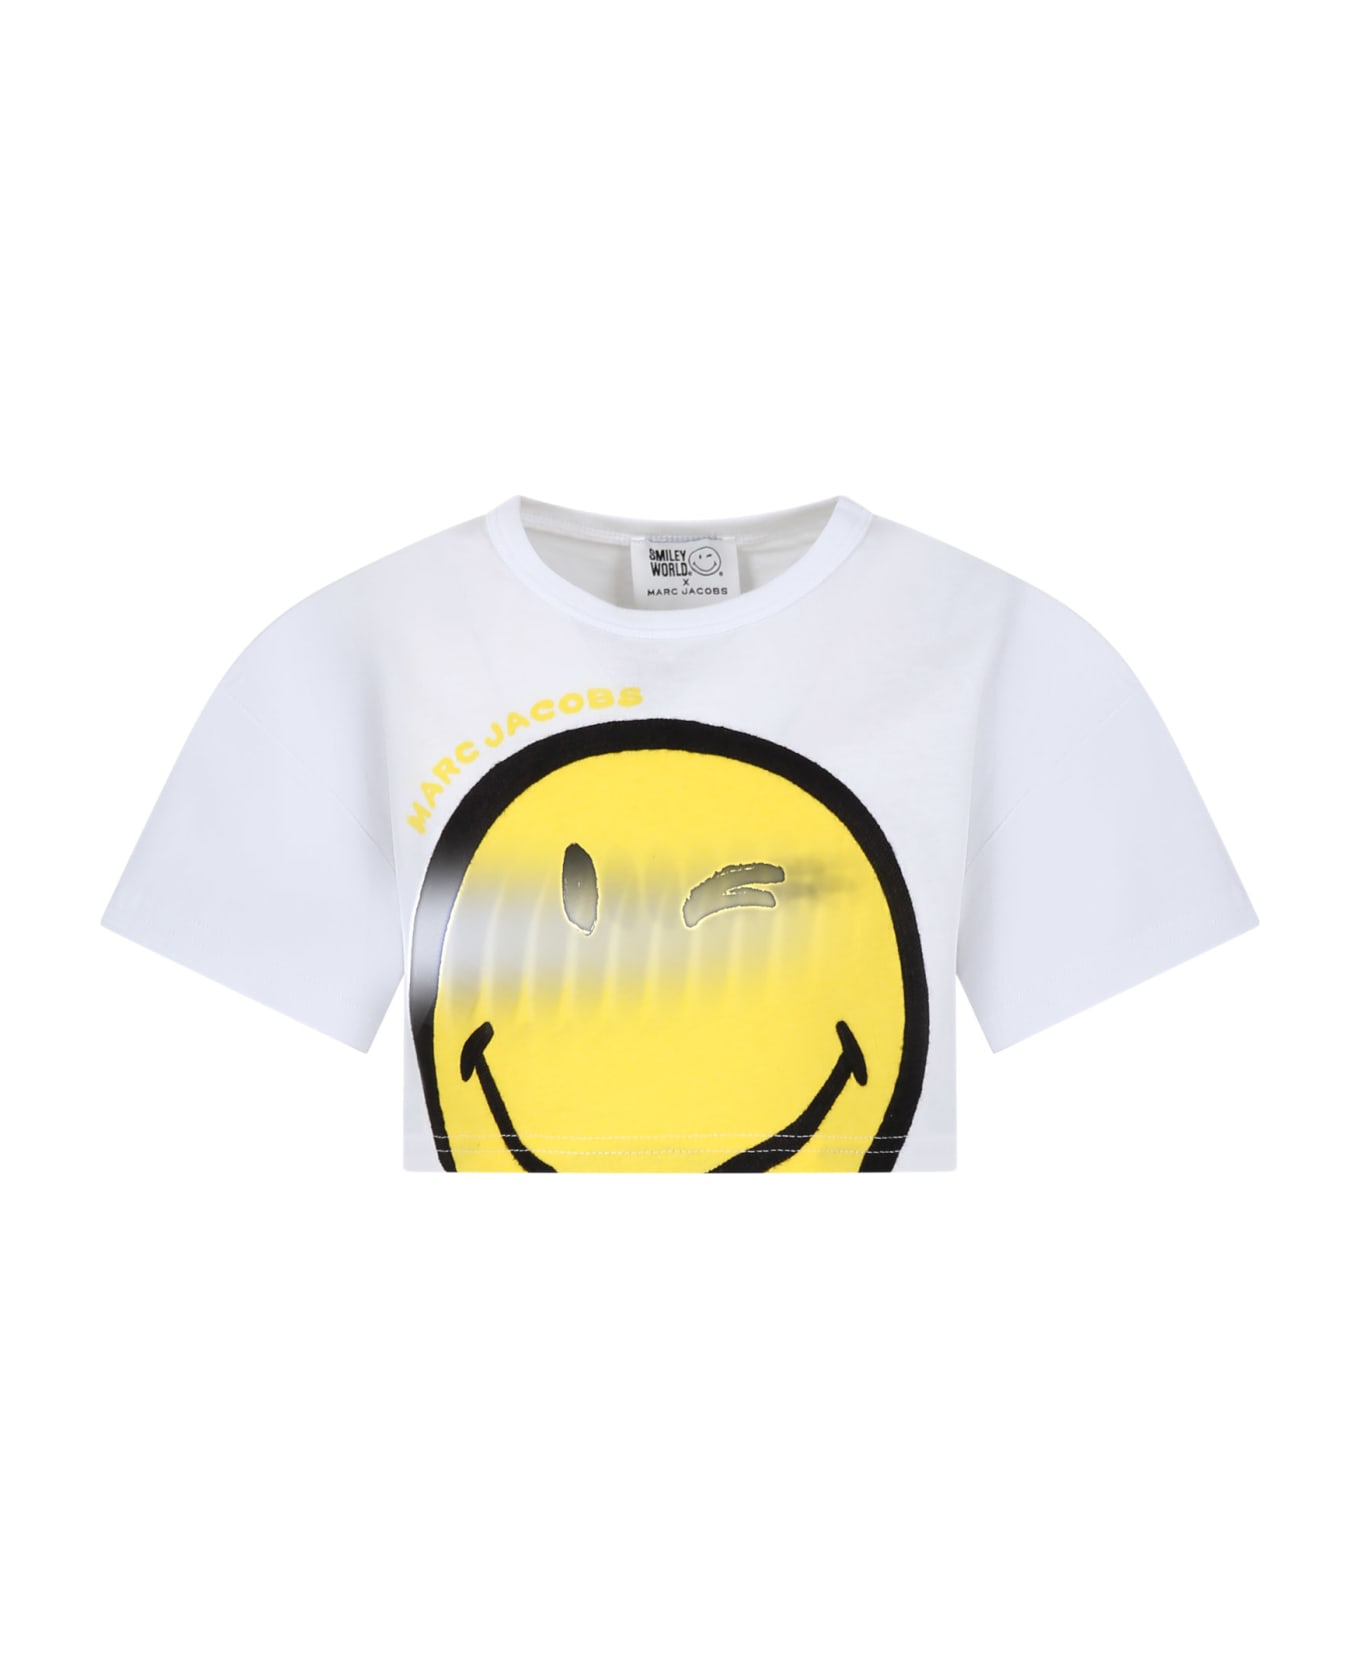 Marc Jacobs White T-shirt For Girl With Smiley And Logo - White